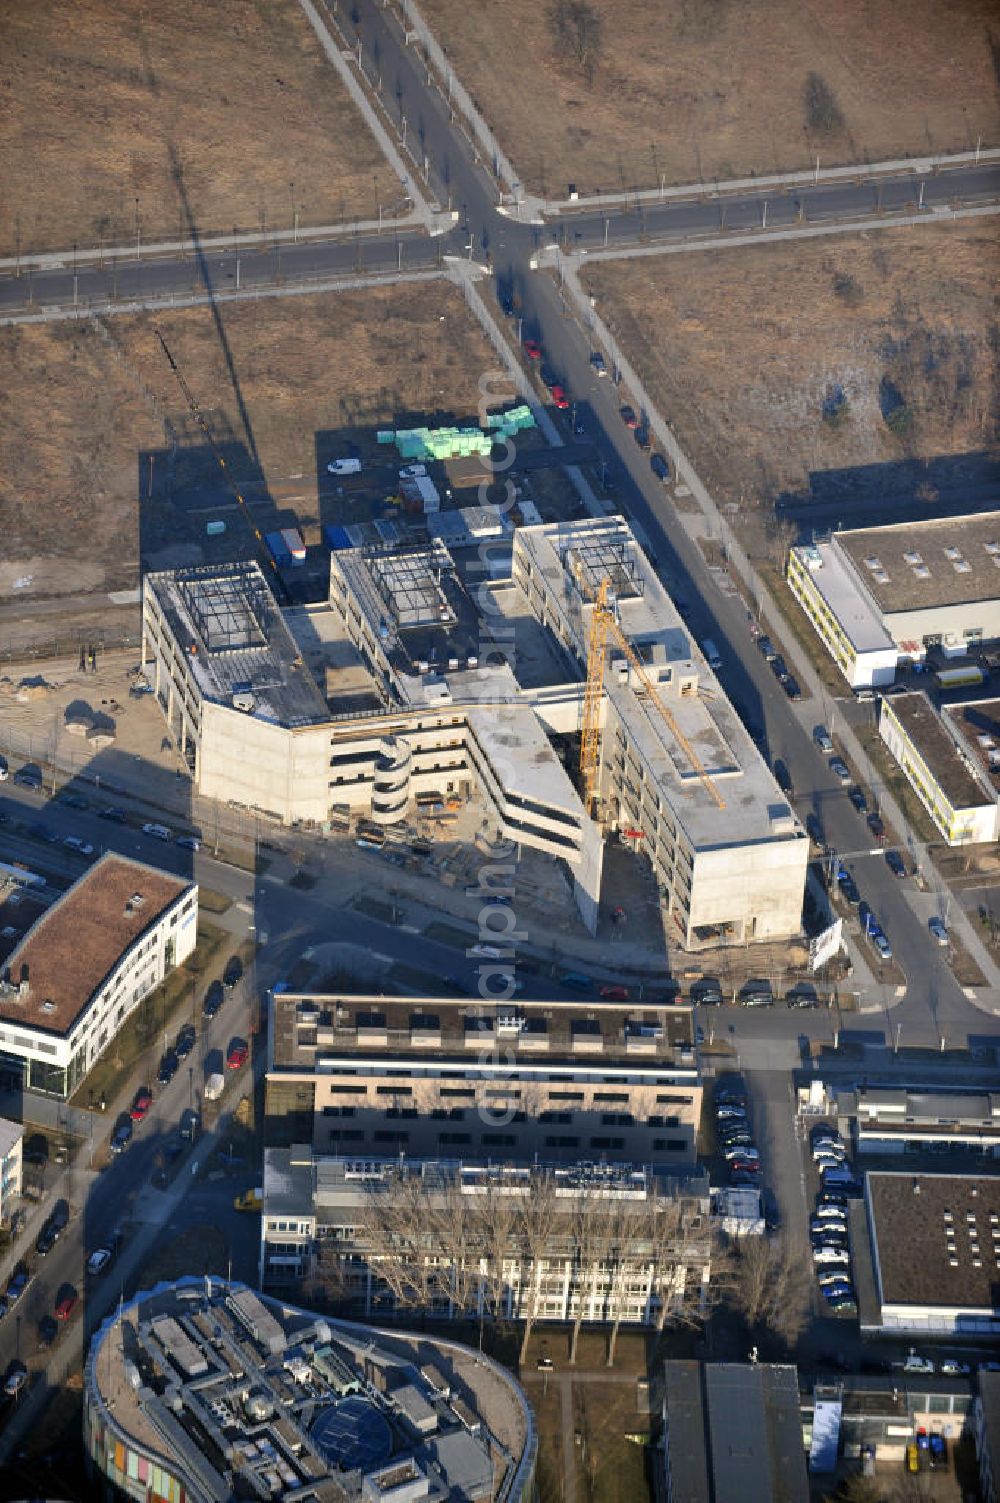 Aerial image Berlin - Construction site of the Centre for Photovoltaic in the Technology Park in Berlin Adlershof. The construction of the hall, laboratory and office building will be conducted by WISTA-Management GmbH in cooperation with Henn Architekten. The Science and Technology Park Adlershof is a cluster of technology centers and research instituts